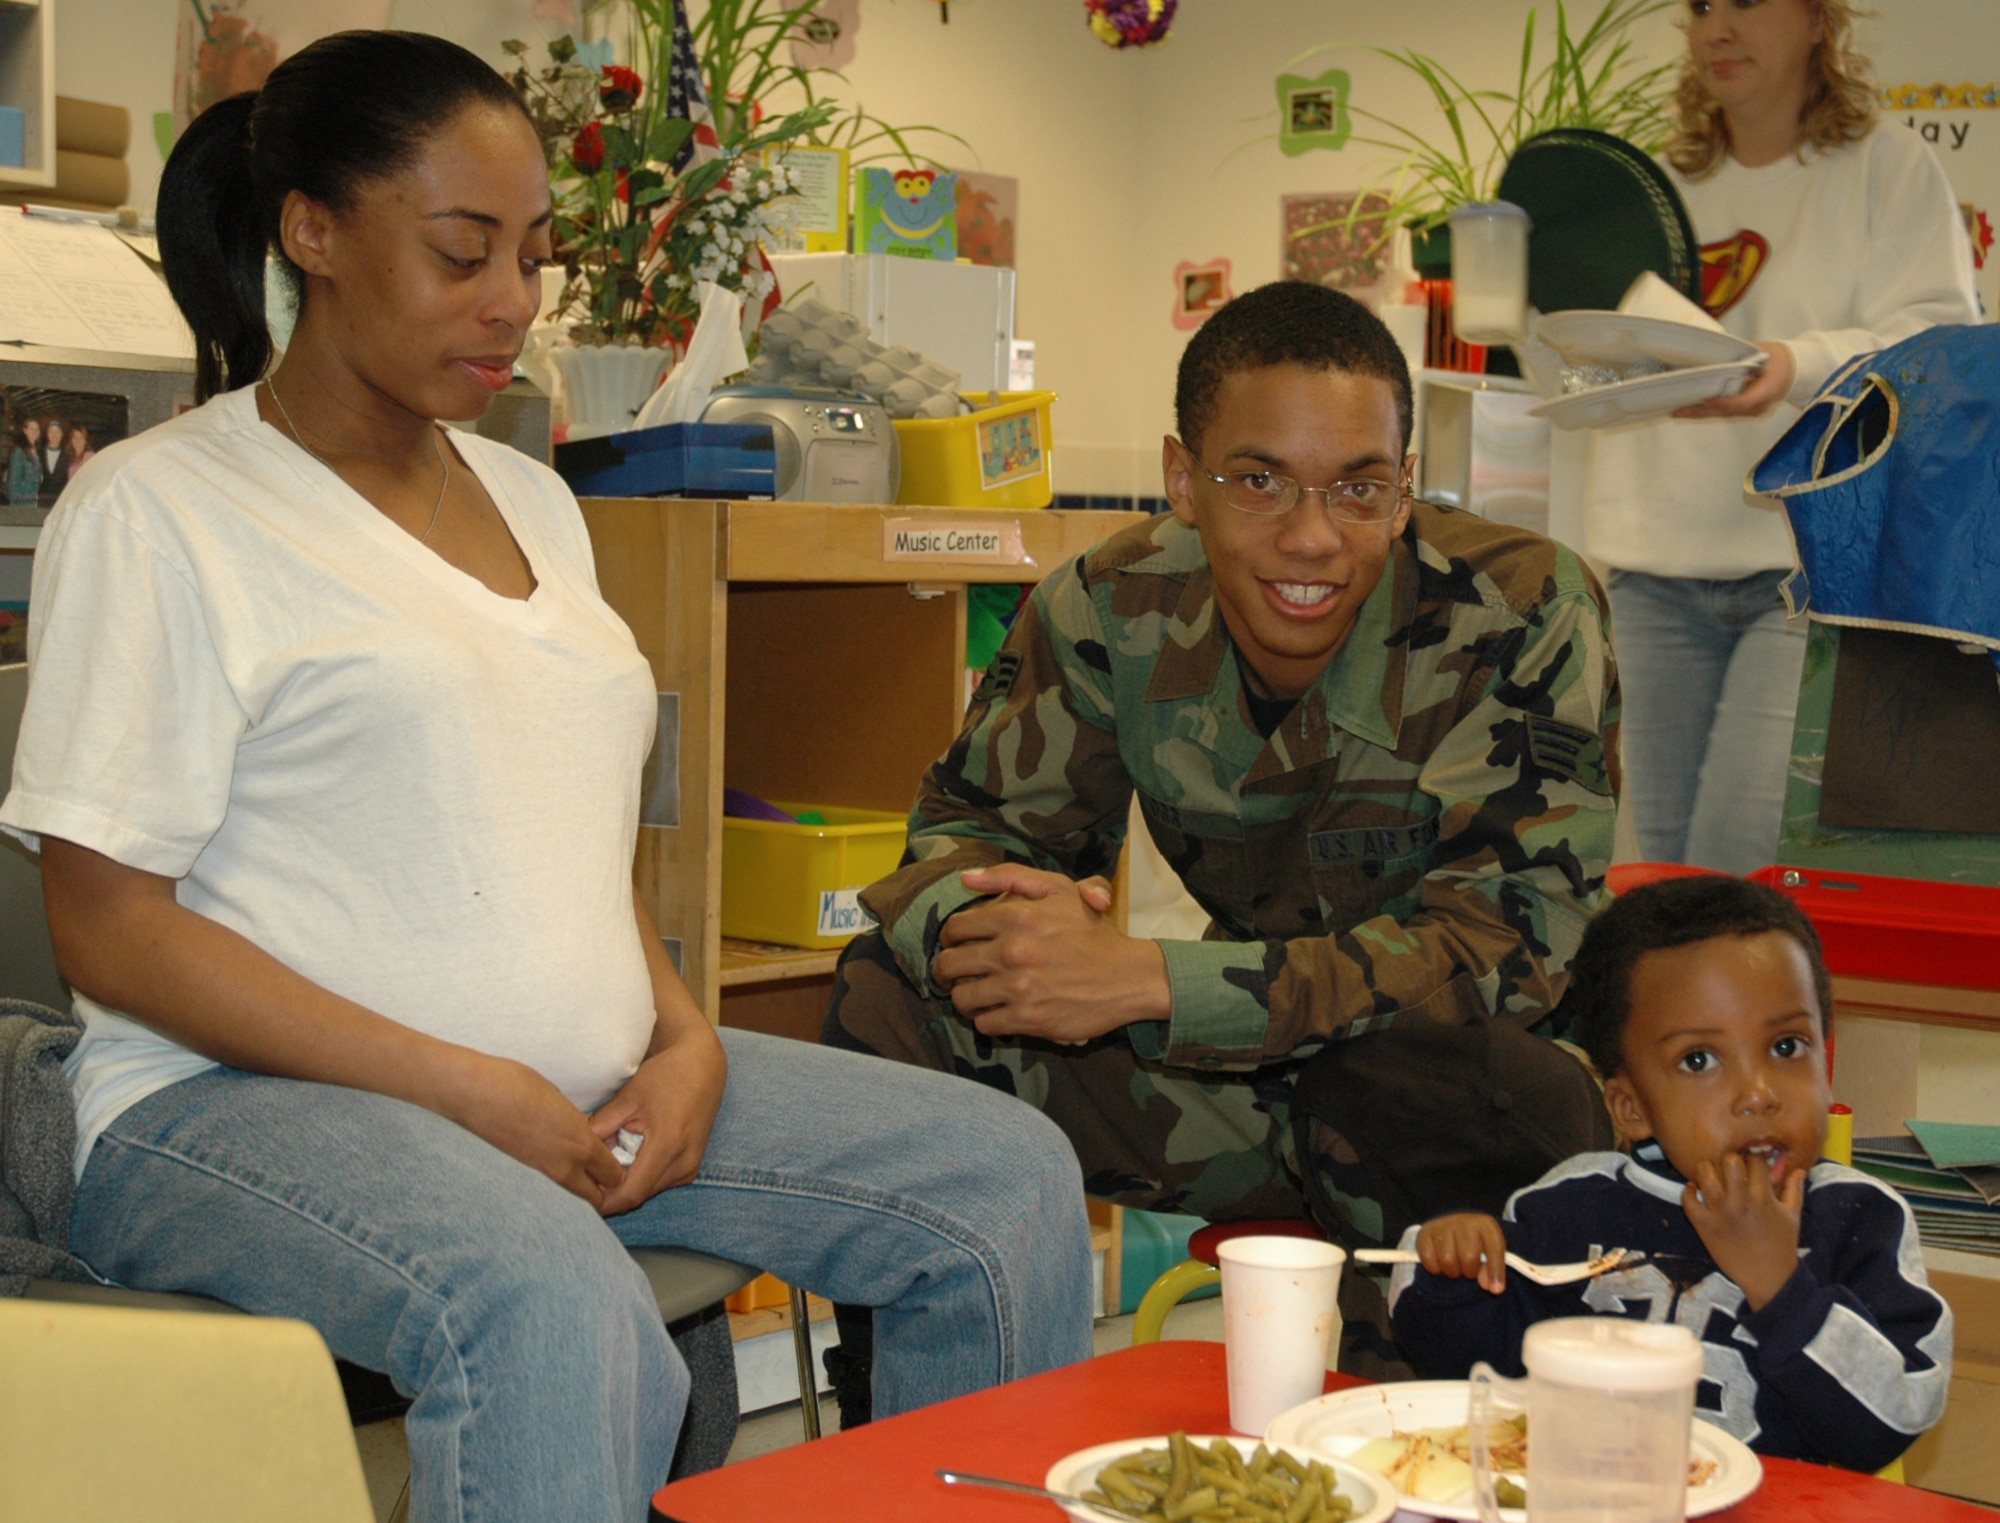 Senior Airman Anson Orr, 22nd Comptroller Squadron, and his wife Adina, join their son Anson, 2, at the Child Development Center April 11 for the Annual Month of the Military Child luncheon.  (Air Force photo by Tech. Sgt. Genevieve Morris 22nd ARW Public Affairs)